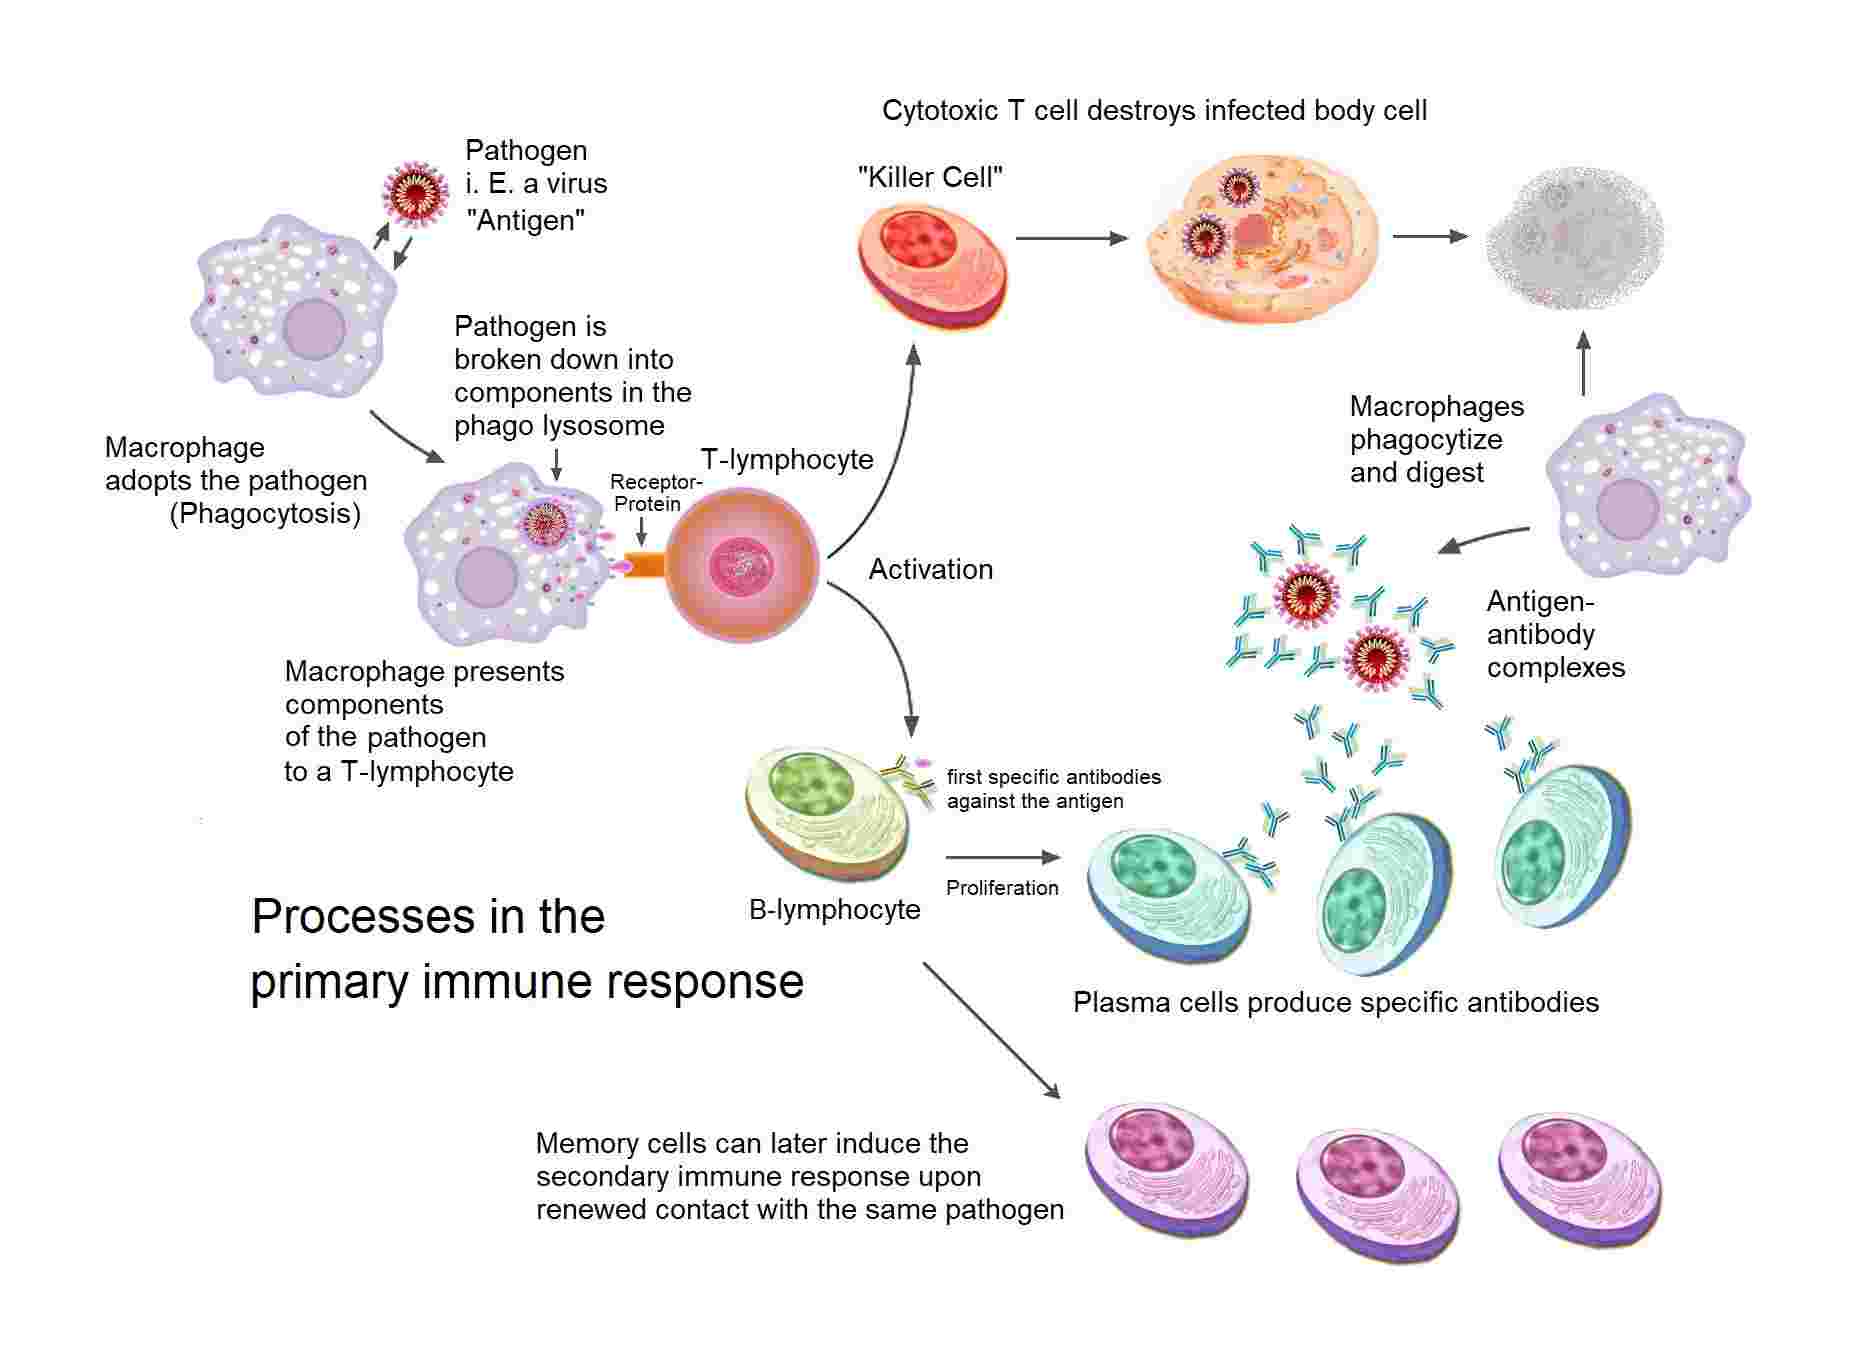 Fig. 1 Overview of the primary immune response. (From Wikipedia: Sciencia58 an the makers of the single images Domdomegg, Fæ, Petr94, Manu5 - Own Graphic using File:Macrophage.svg, File:201308 B cell.svg, File:Normal plasma blood cells.jpg, File:Aufbau einer Tierischen Zelle.jpg, File:3D medical animation coronavirus structure.jpg, source: Immune response， https://commons.wikimedia.org/wiki/File:Primary_immune_response_1.png)